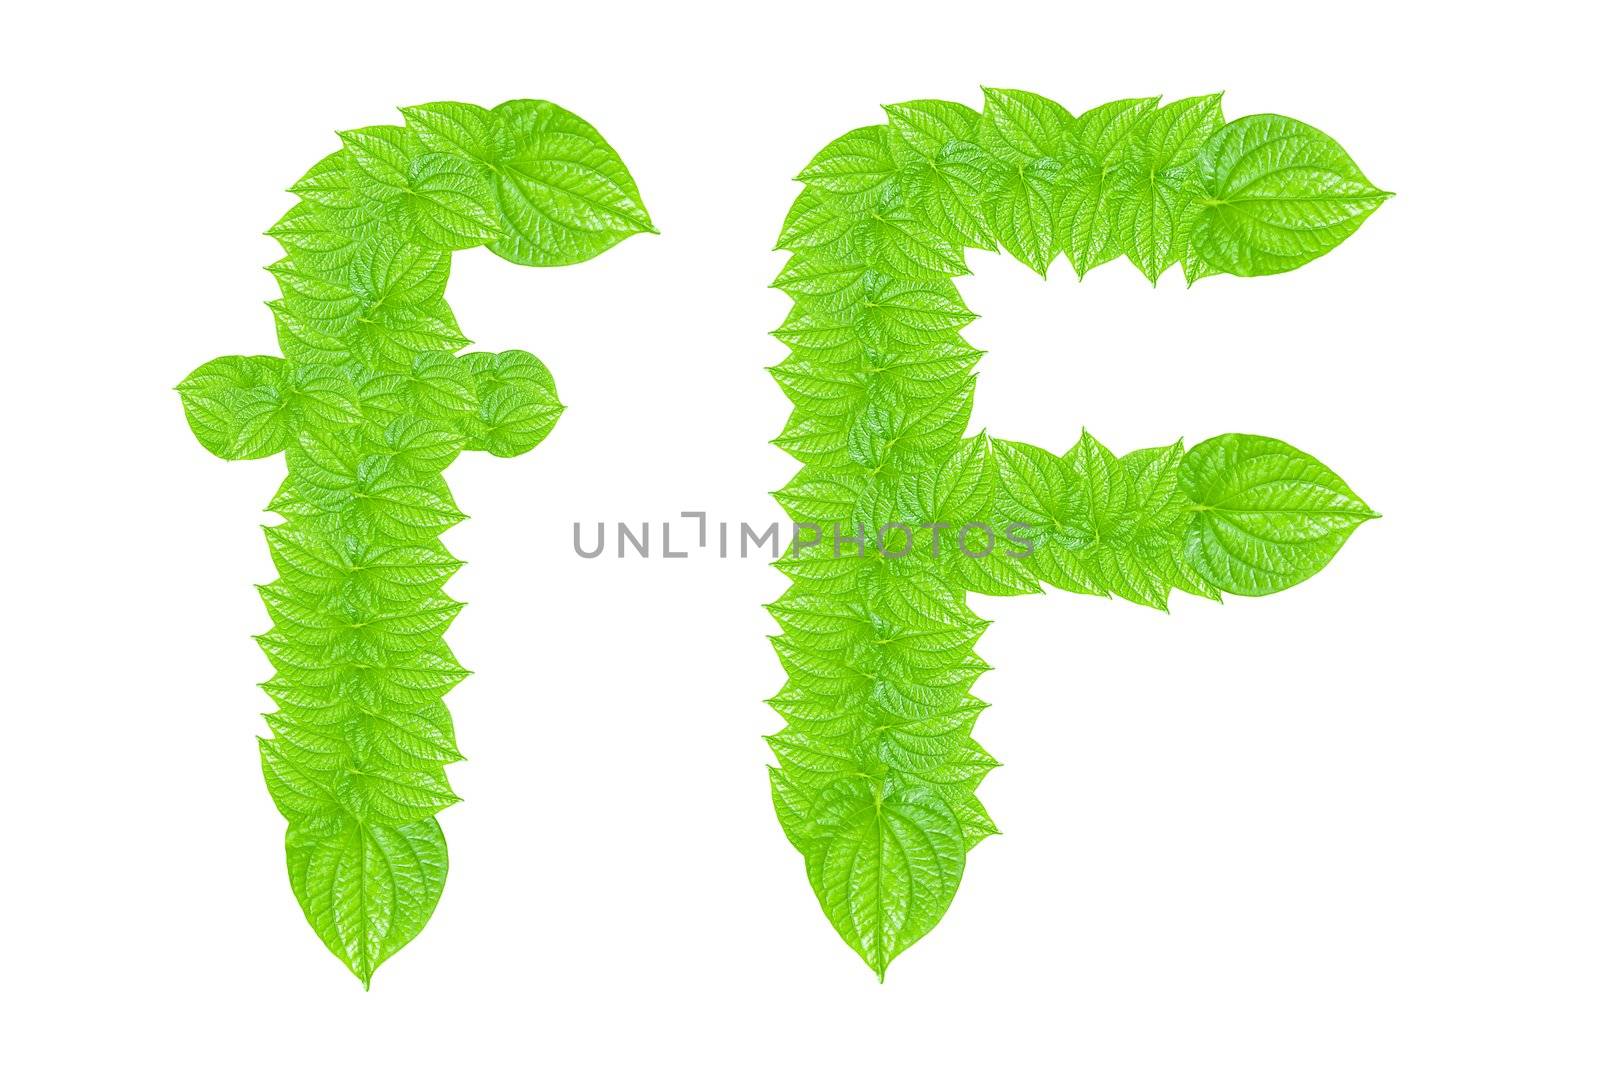 English alphabet made from green leafs with letter F in small capital and large capital letter